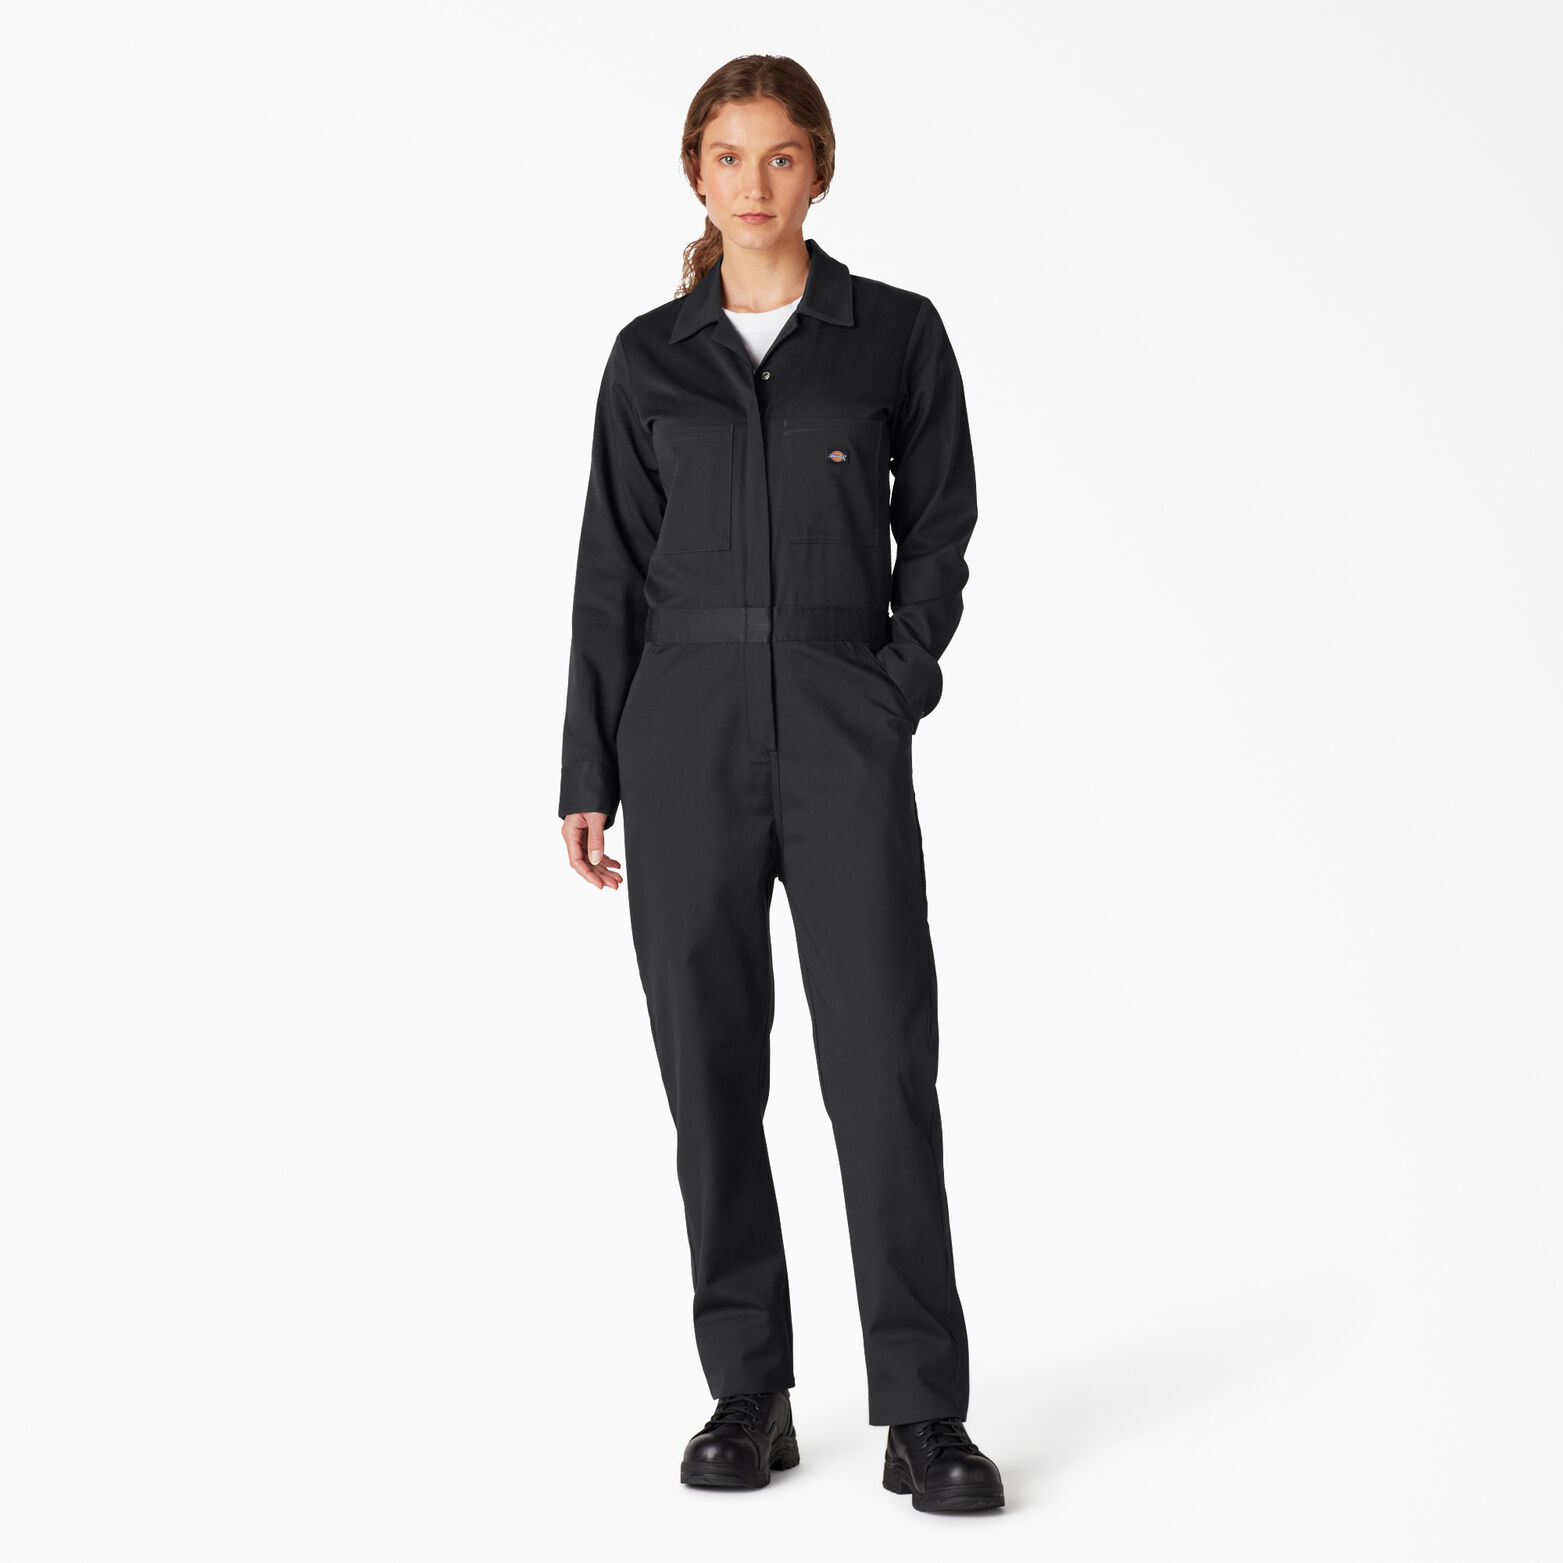 Women's Long Sleeve Cotton Coveralls - Dickies US